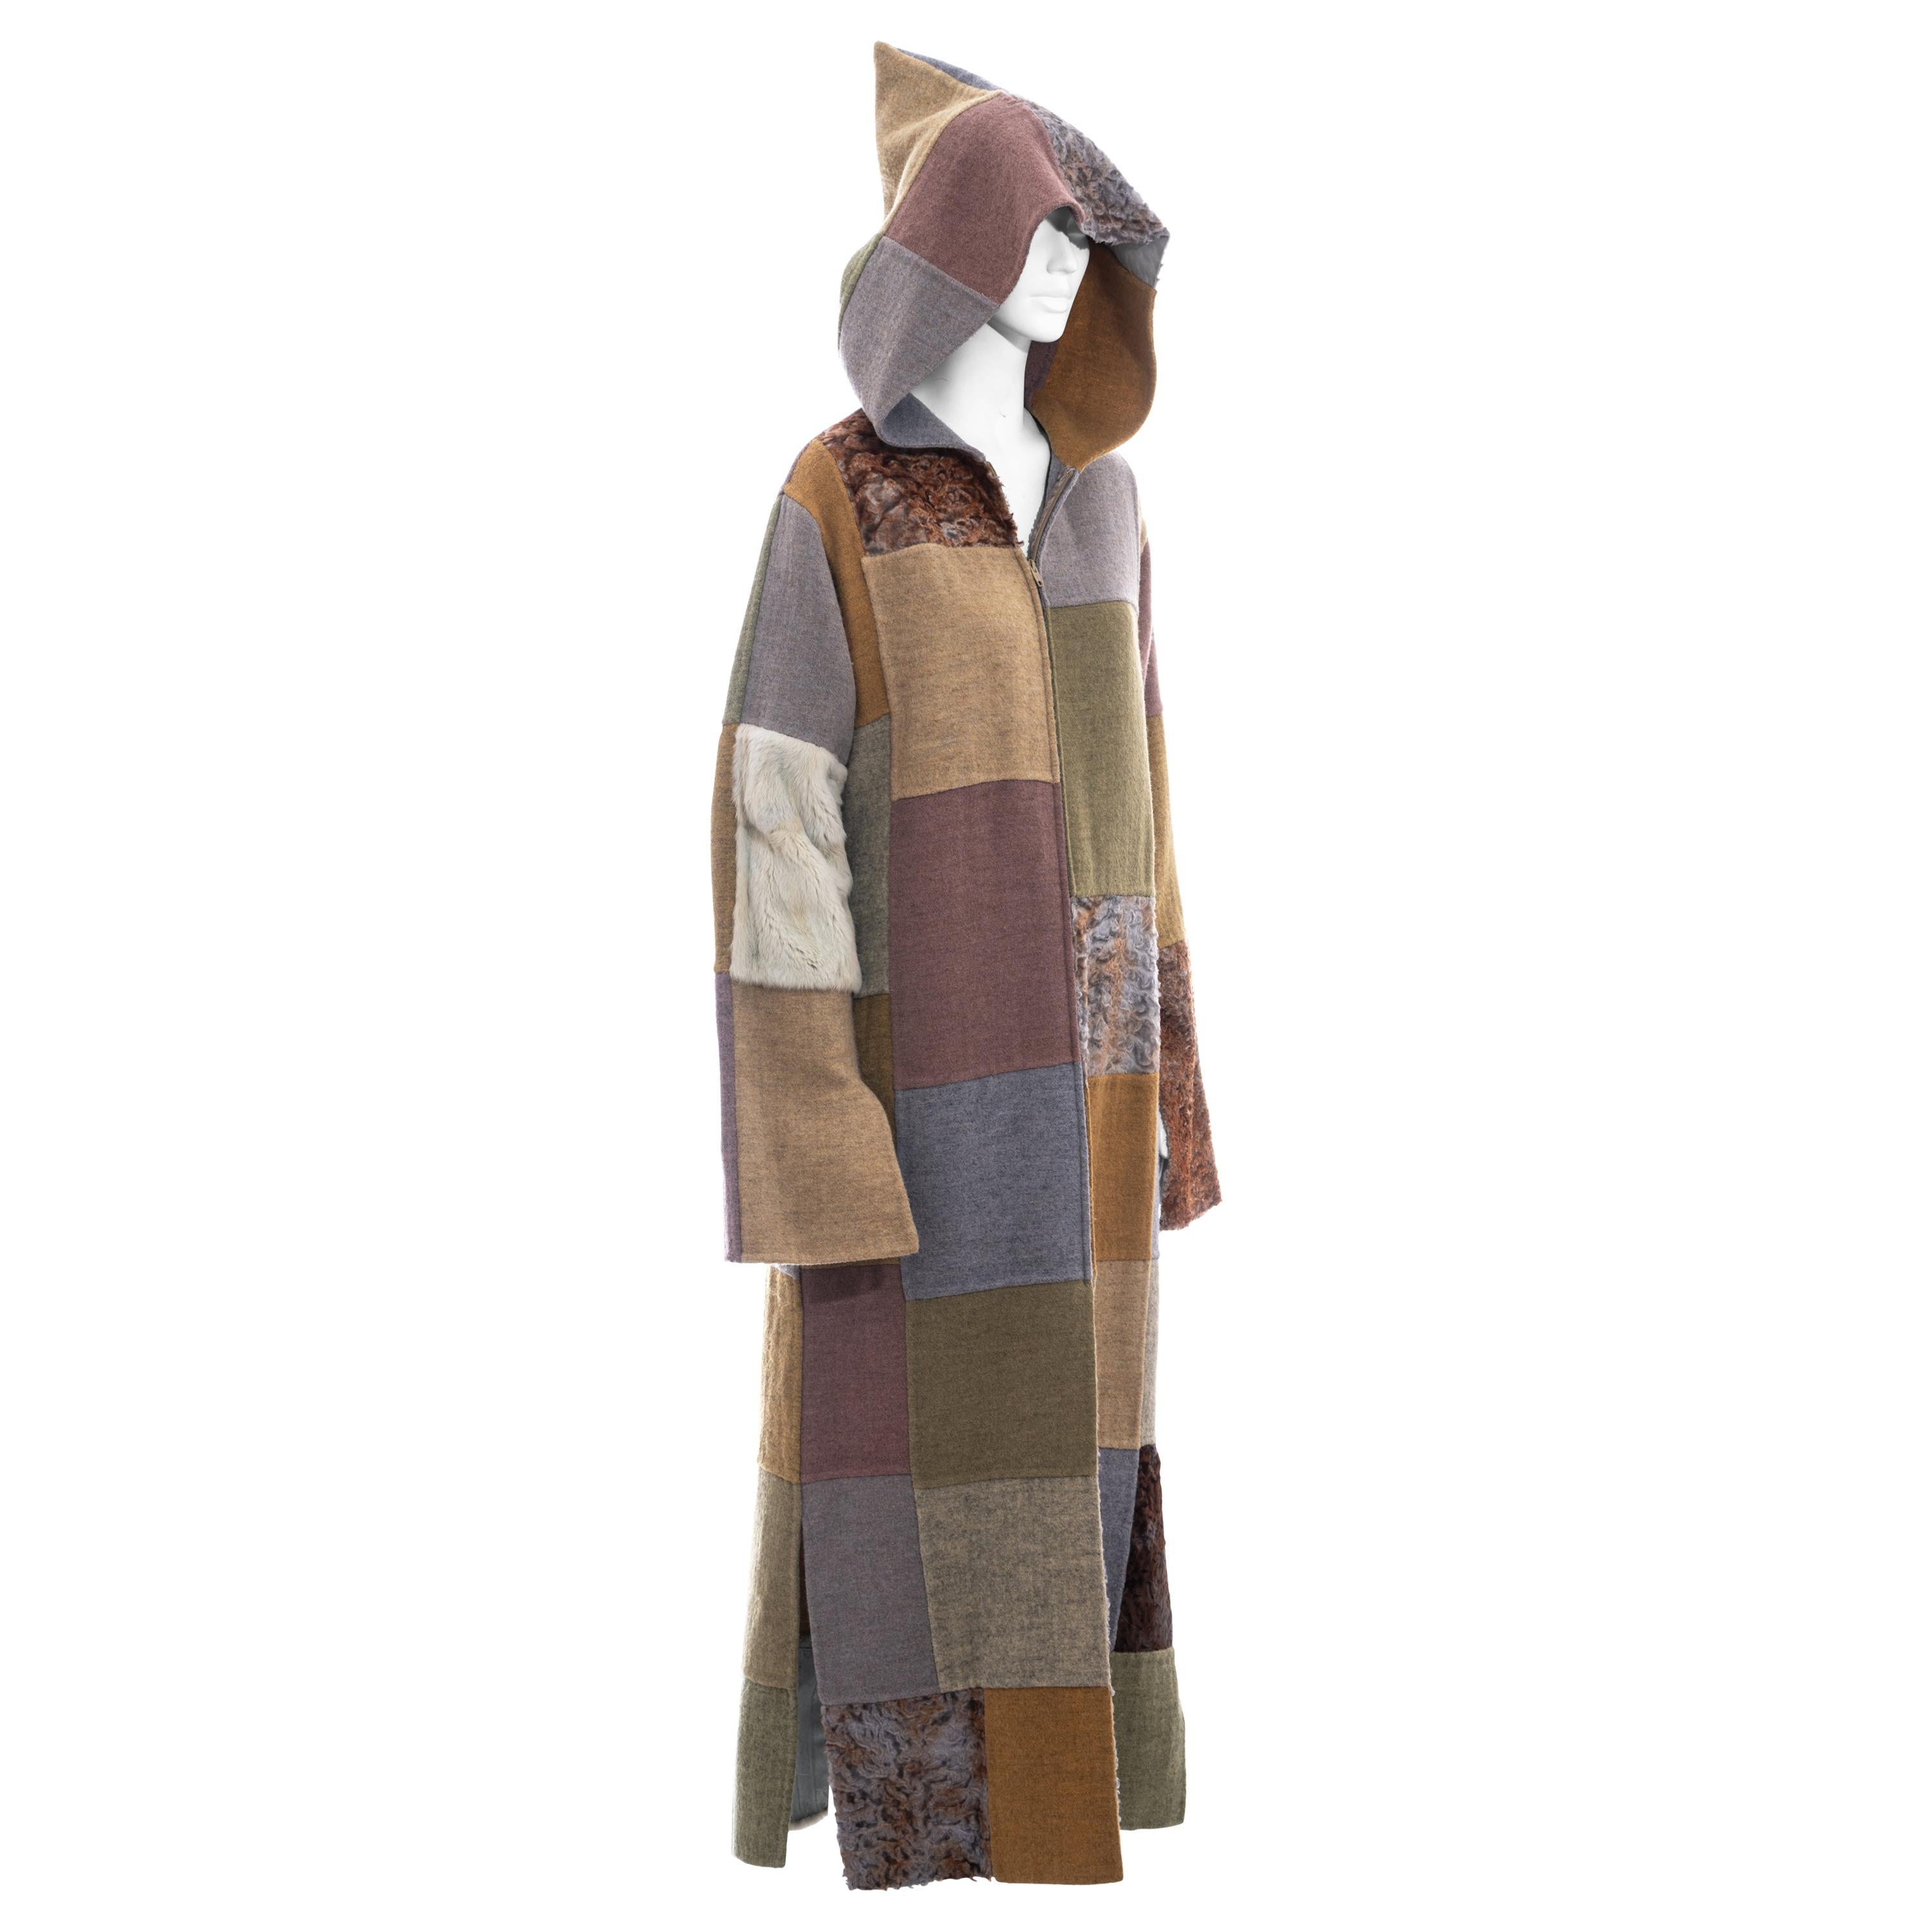 Fendi by Karl Lagerfeld multicoloured patchwork wool and fur maxi coat, fw 1999